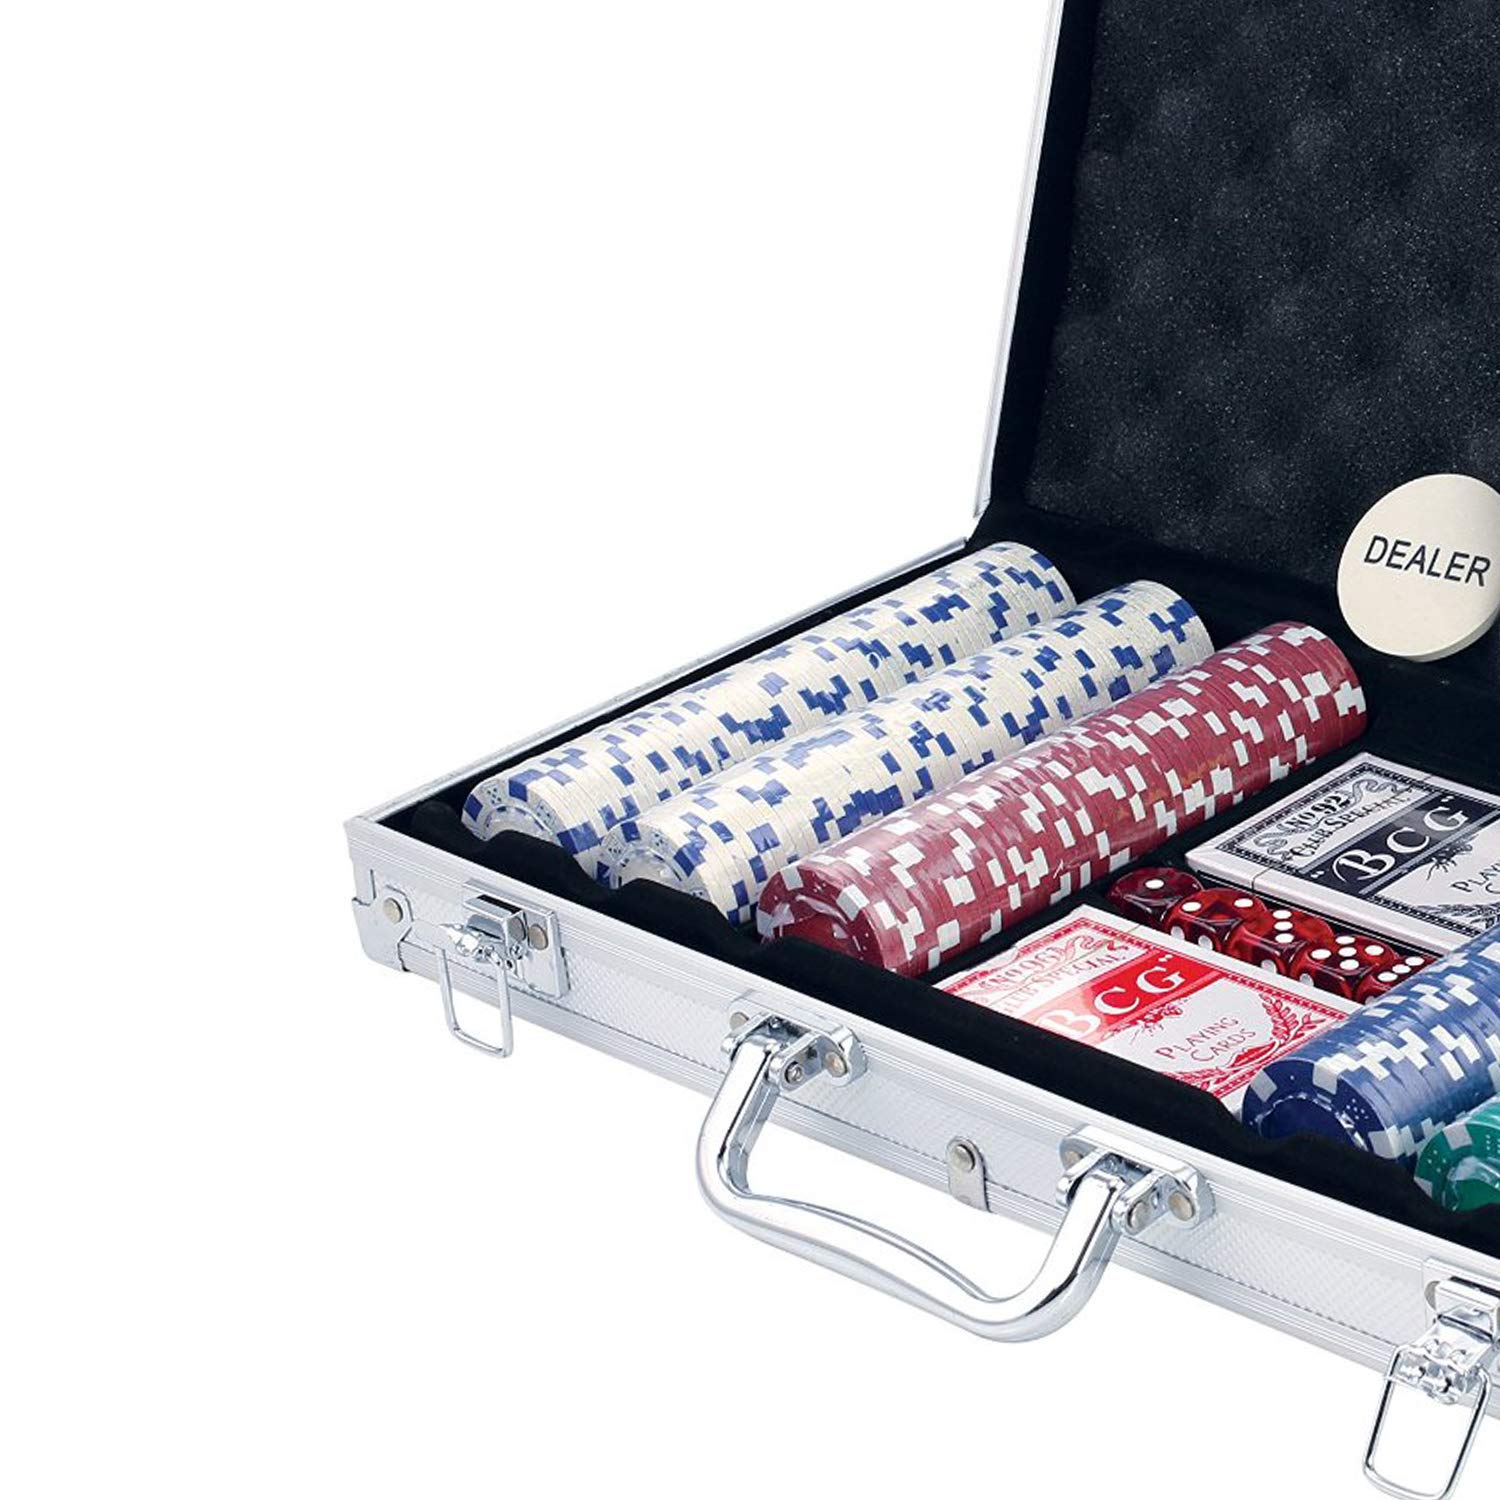 KIDS MANDI complete poker game set with chips, cards, and case